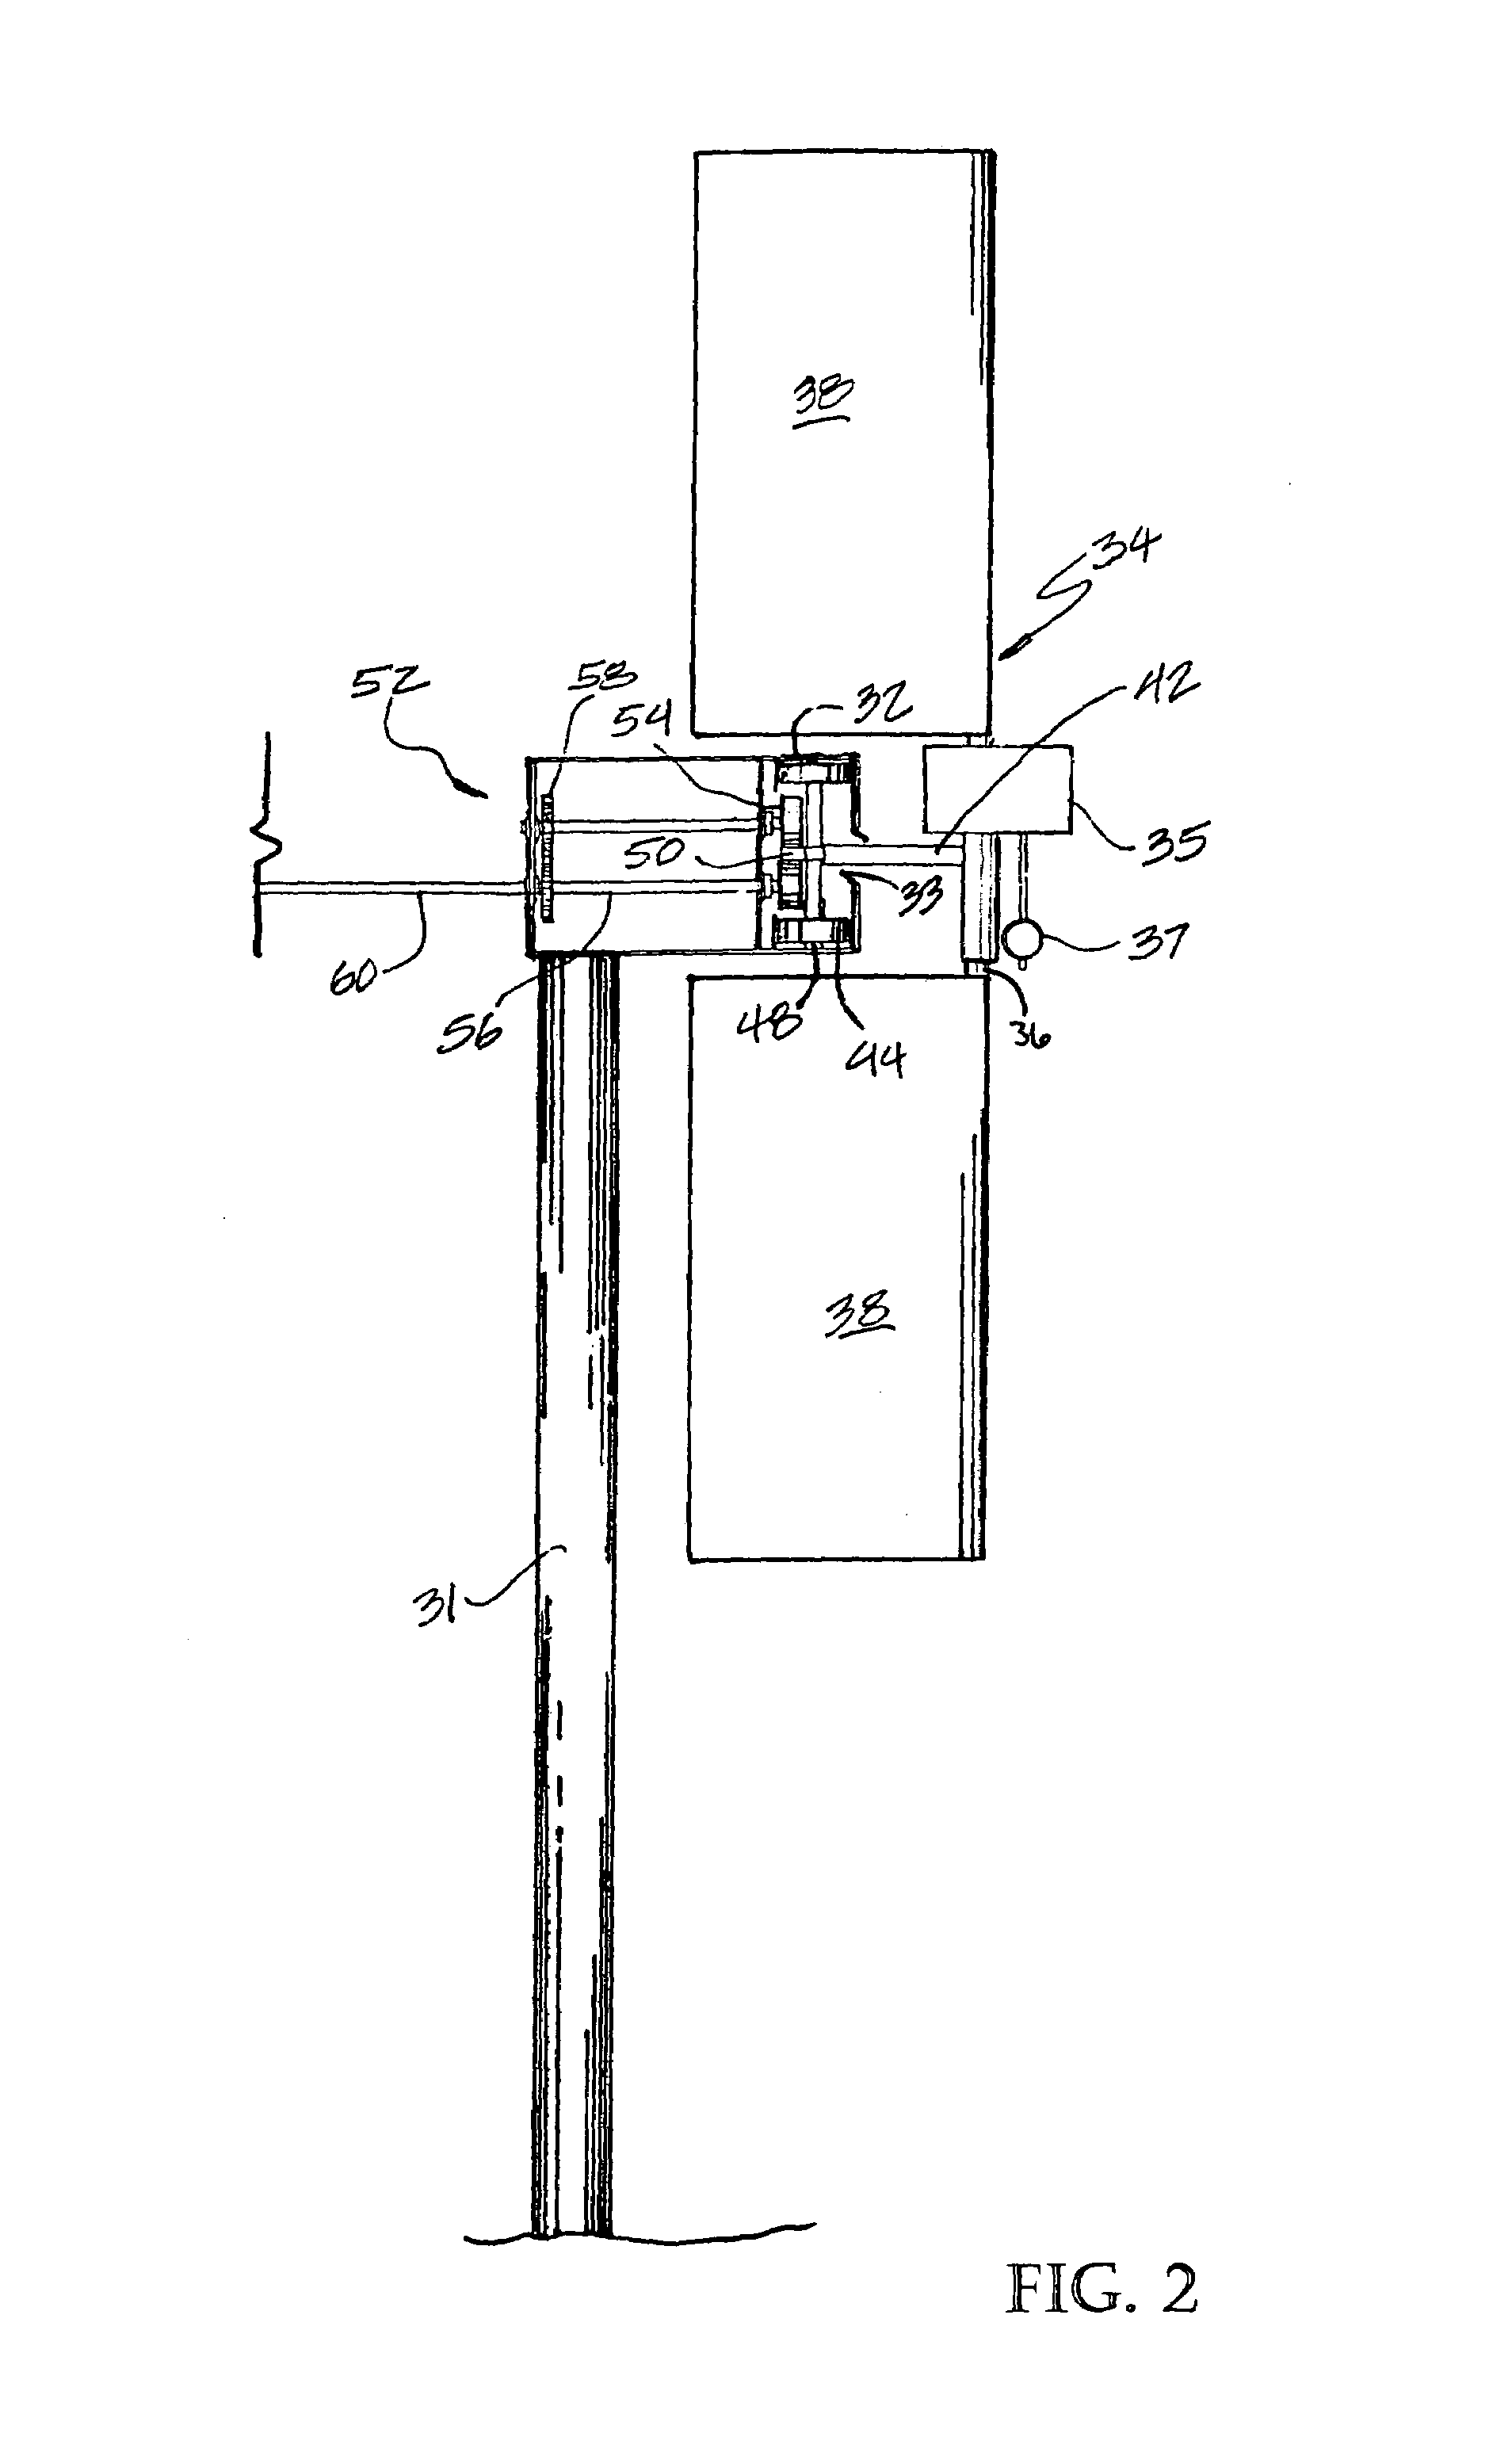 Wind and water power generation device using a rail system